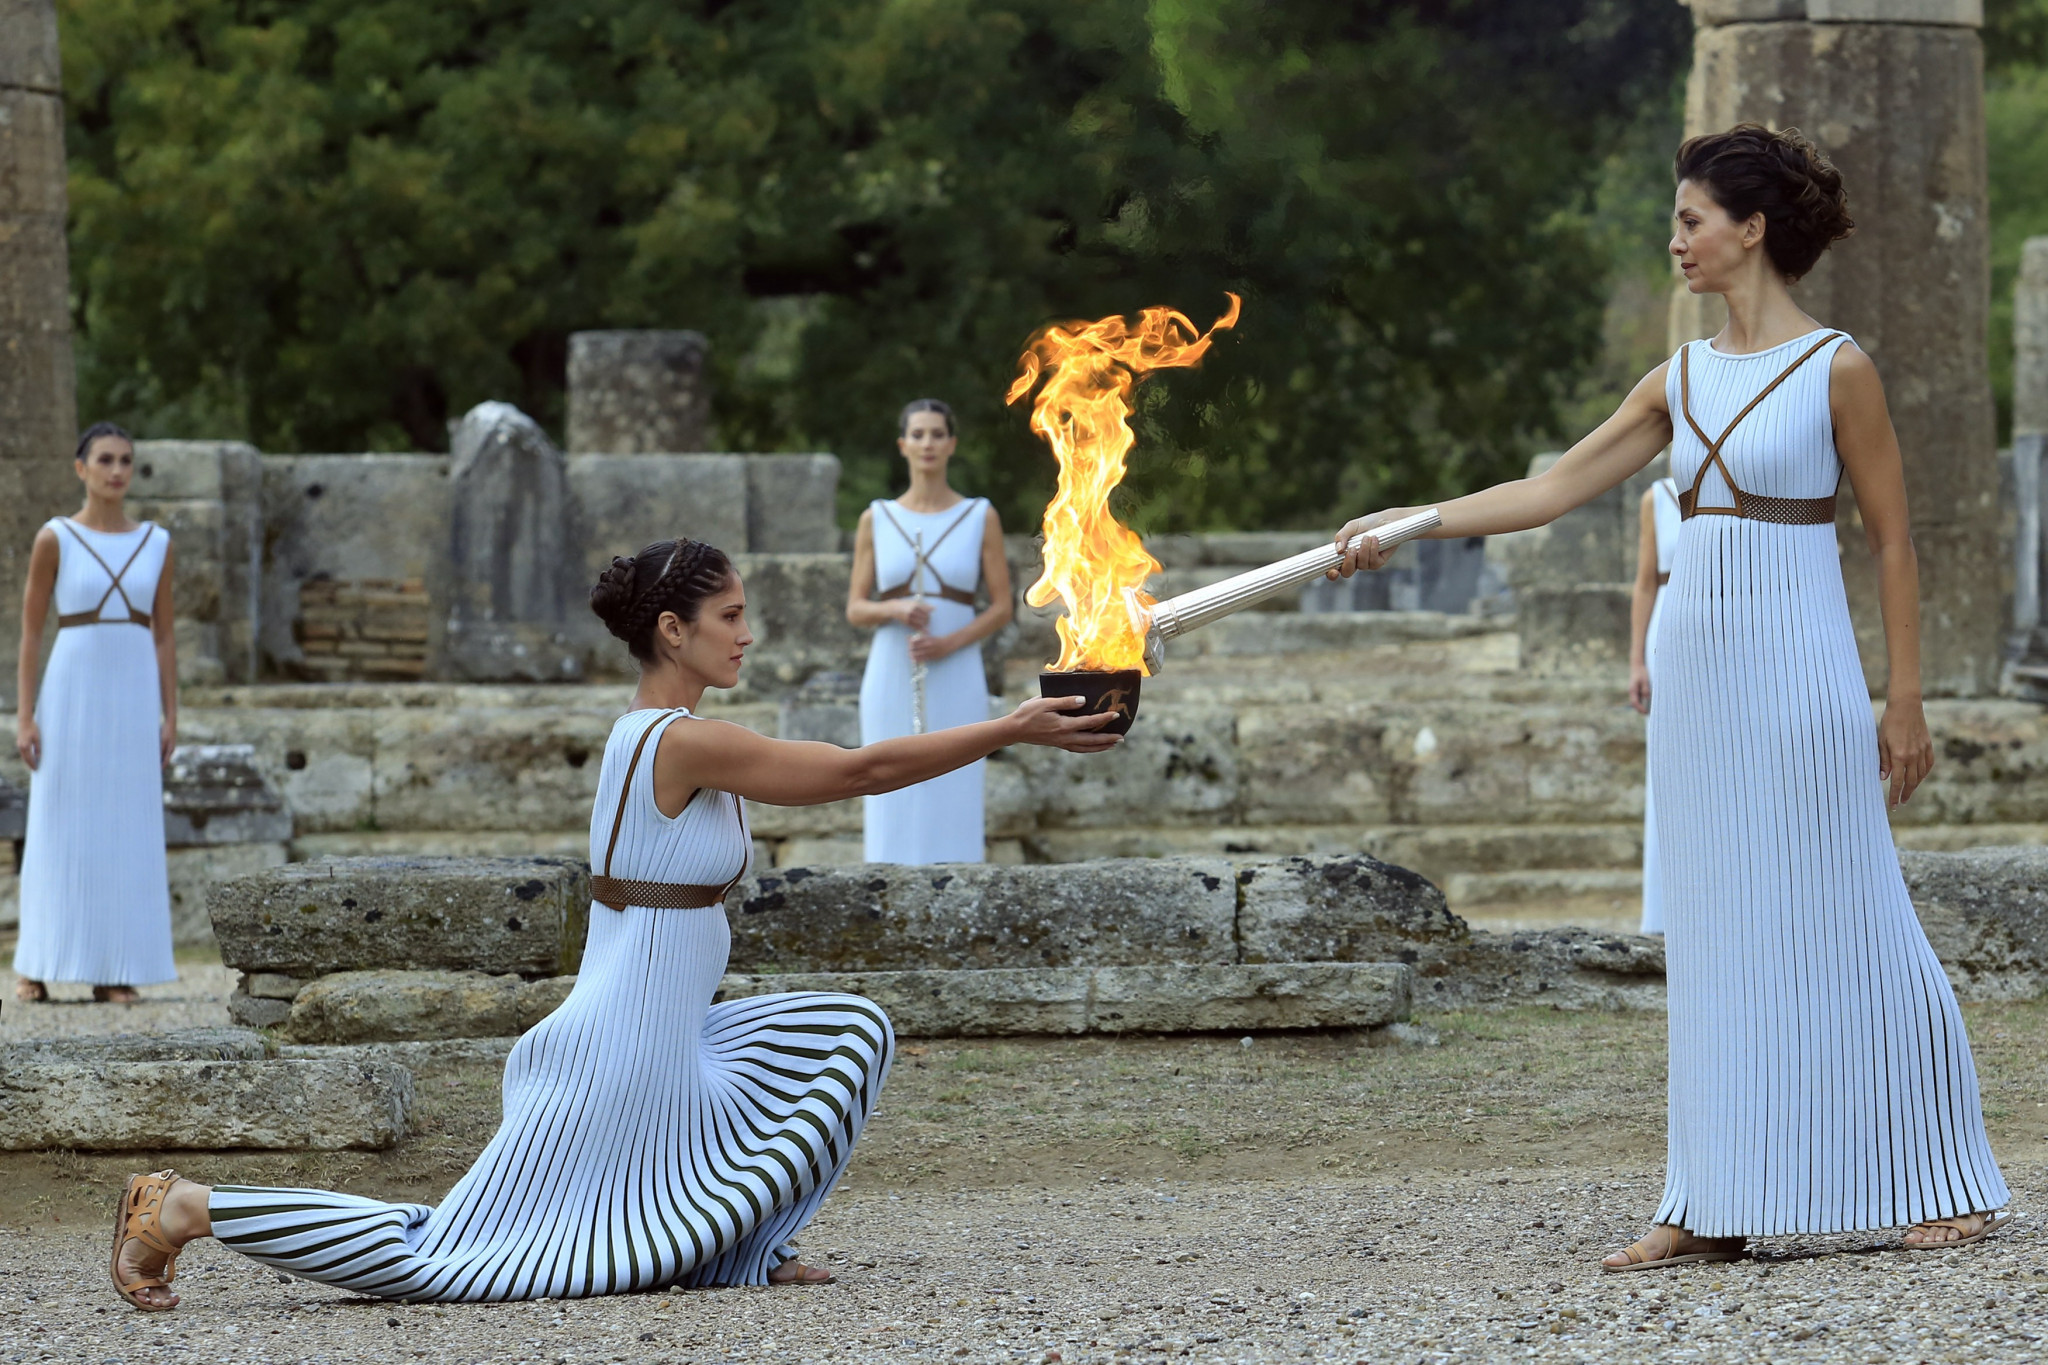 The Torch for Pyeongchang 2018 was lit today in Ancient Olympia ©Getty Images